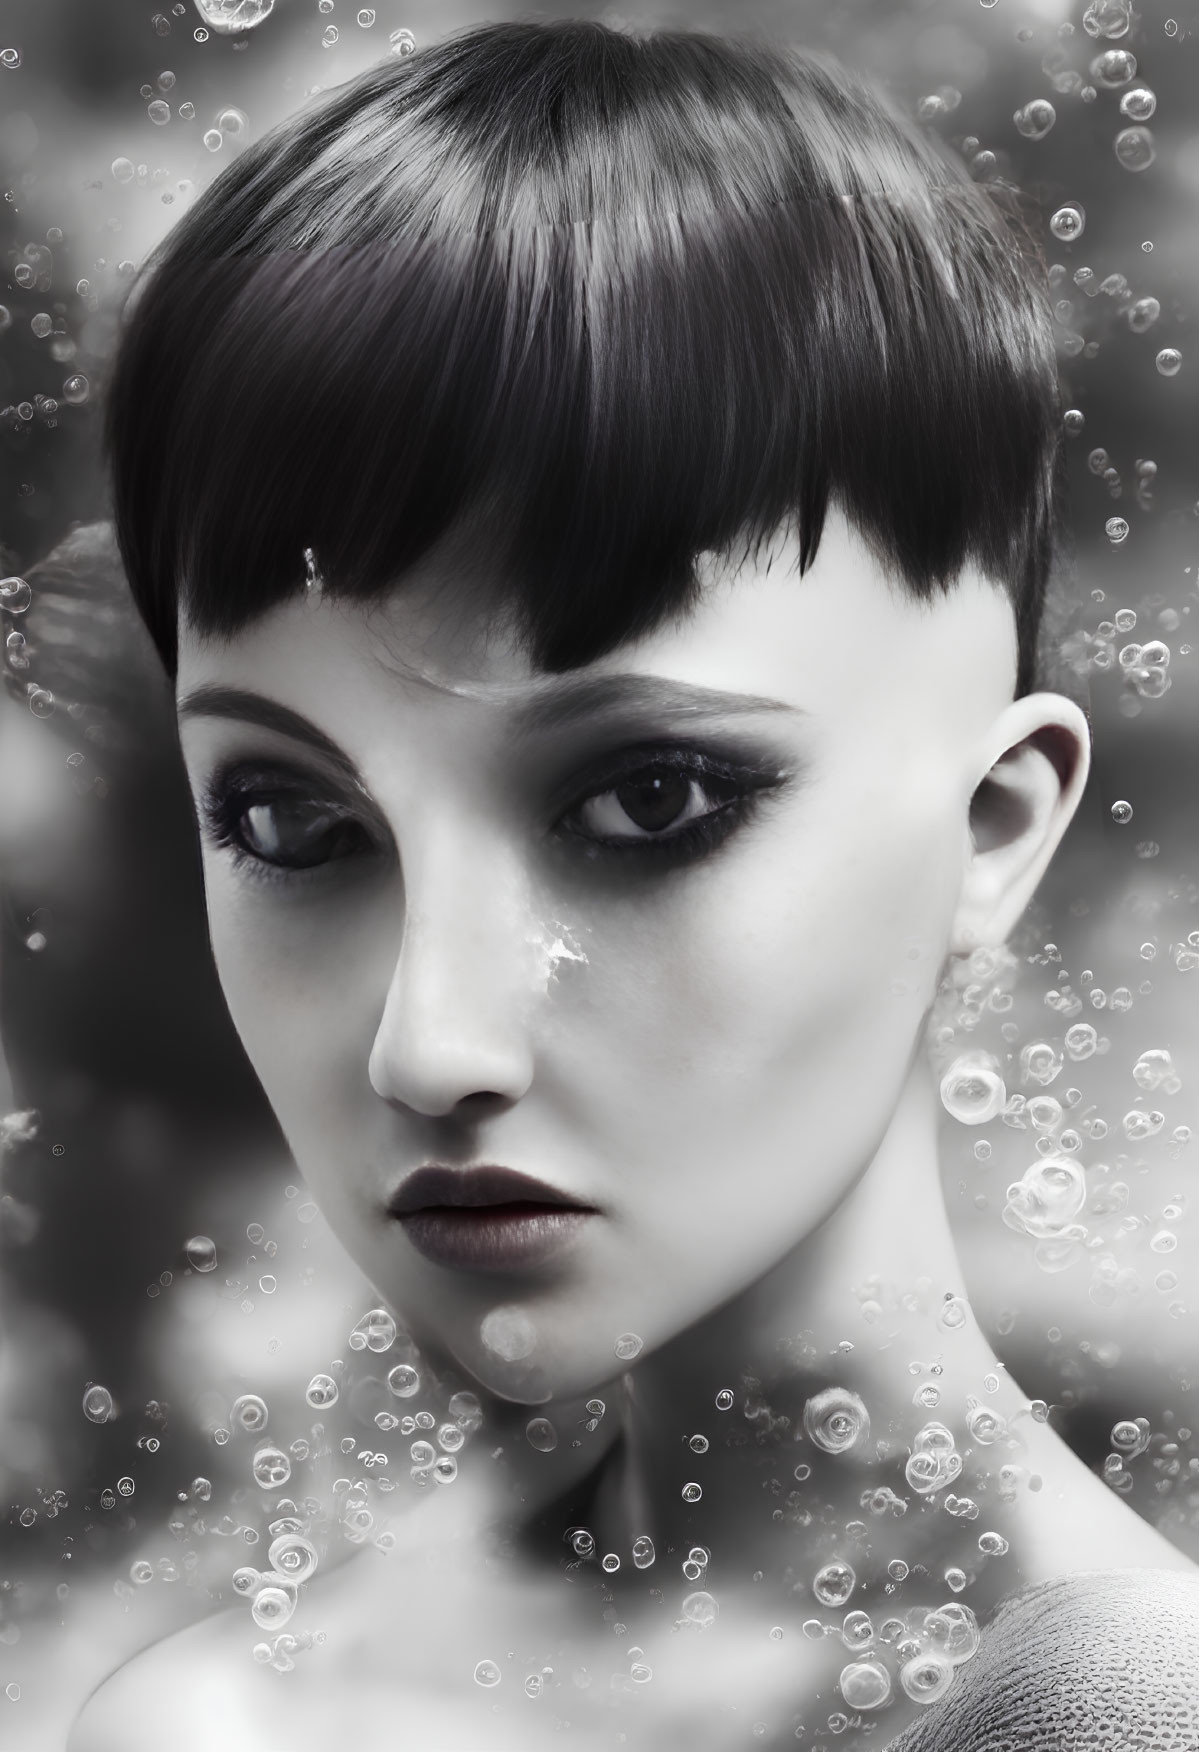 Monochrome portrait of woman with short haircut and serious expression against abstract backdrop.